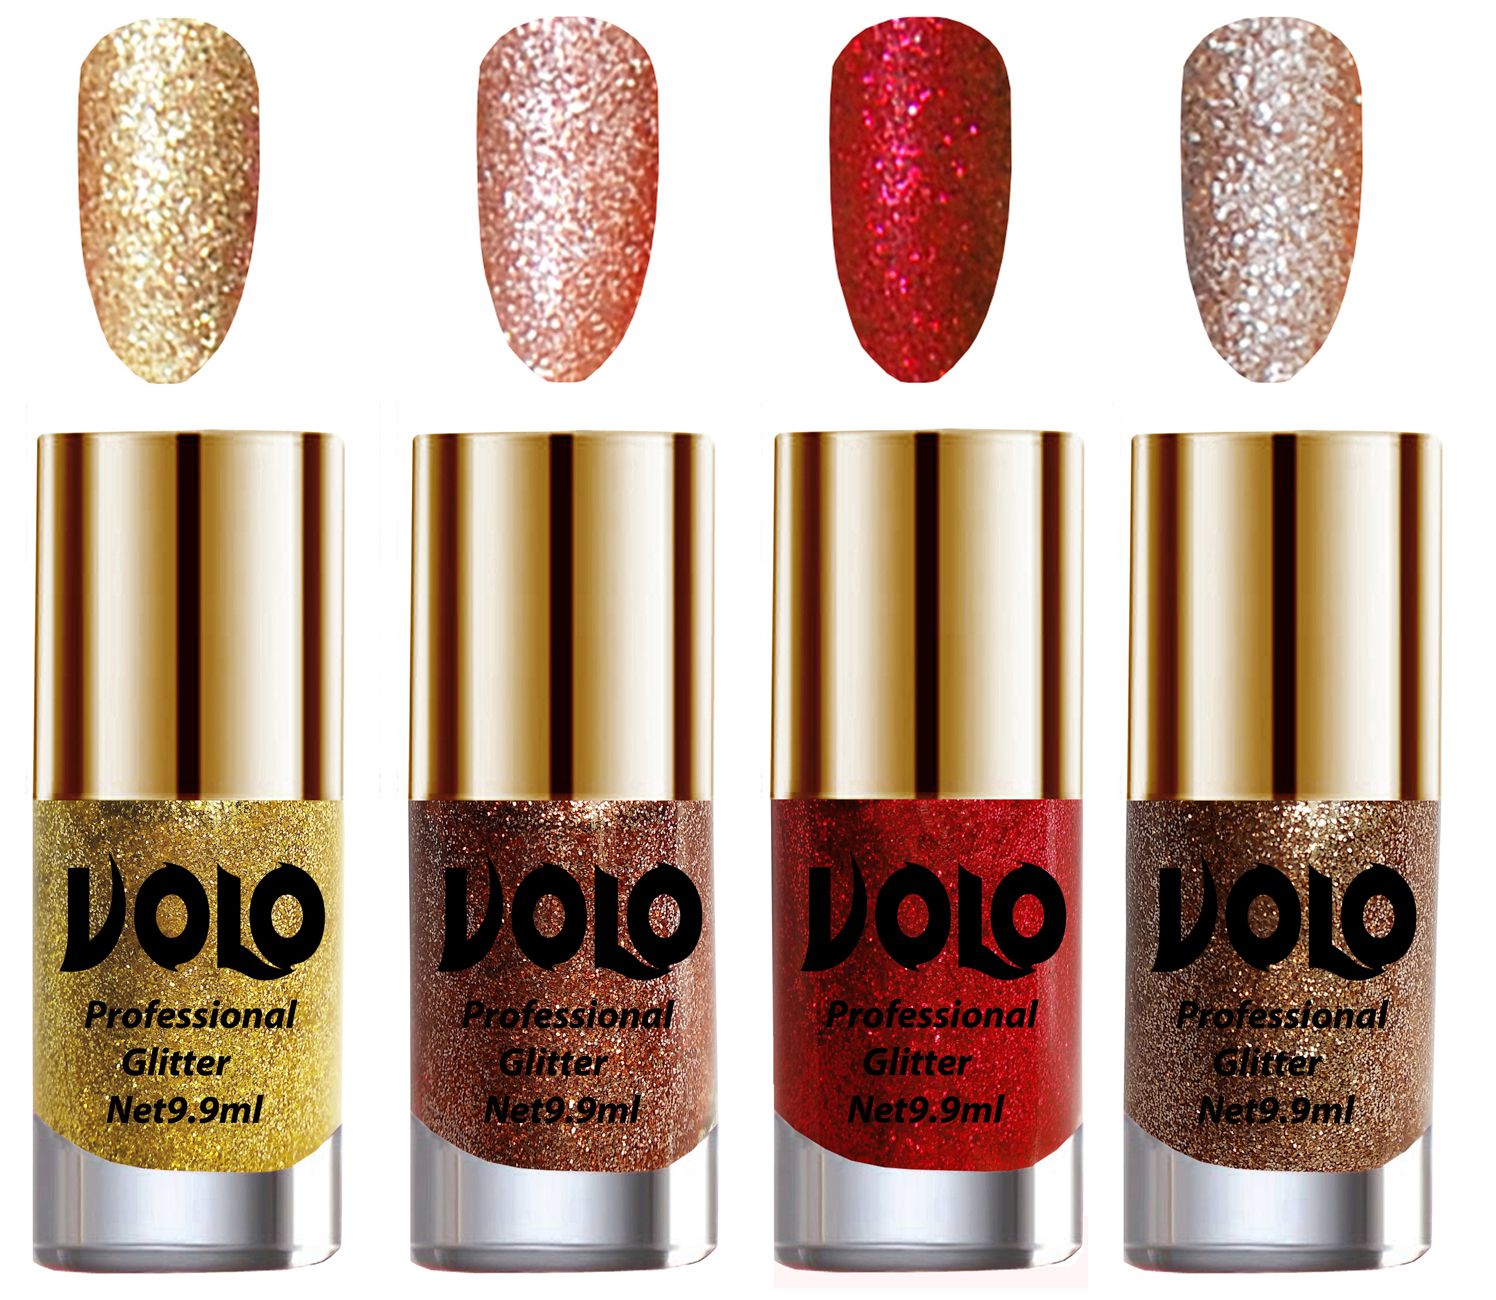     			VOLO Professionally Used Glitter Shine Nail Polish Gold,Peach,Red Gold Pack of 4 39 mL